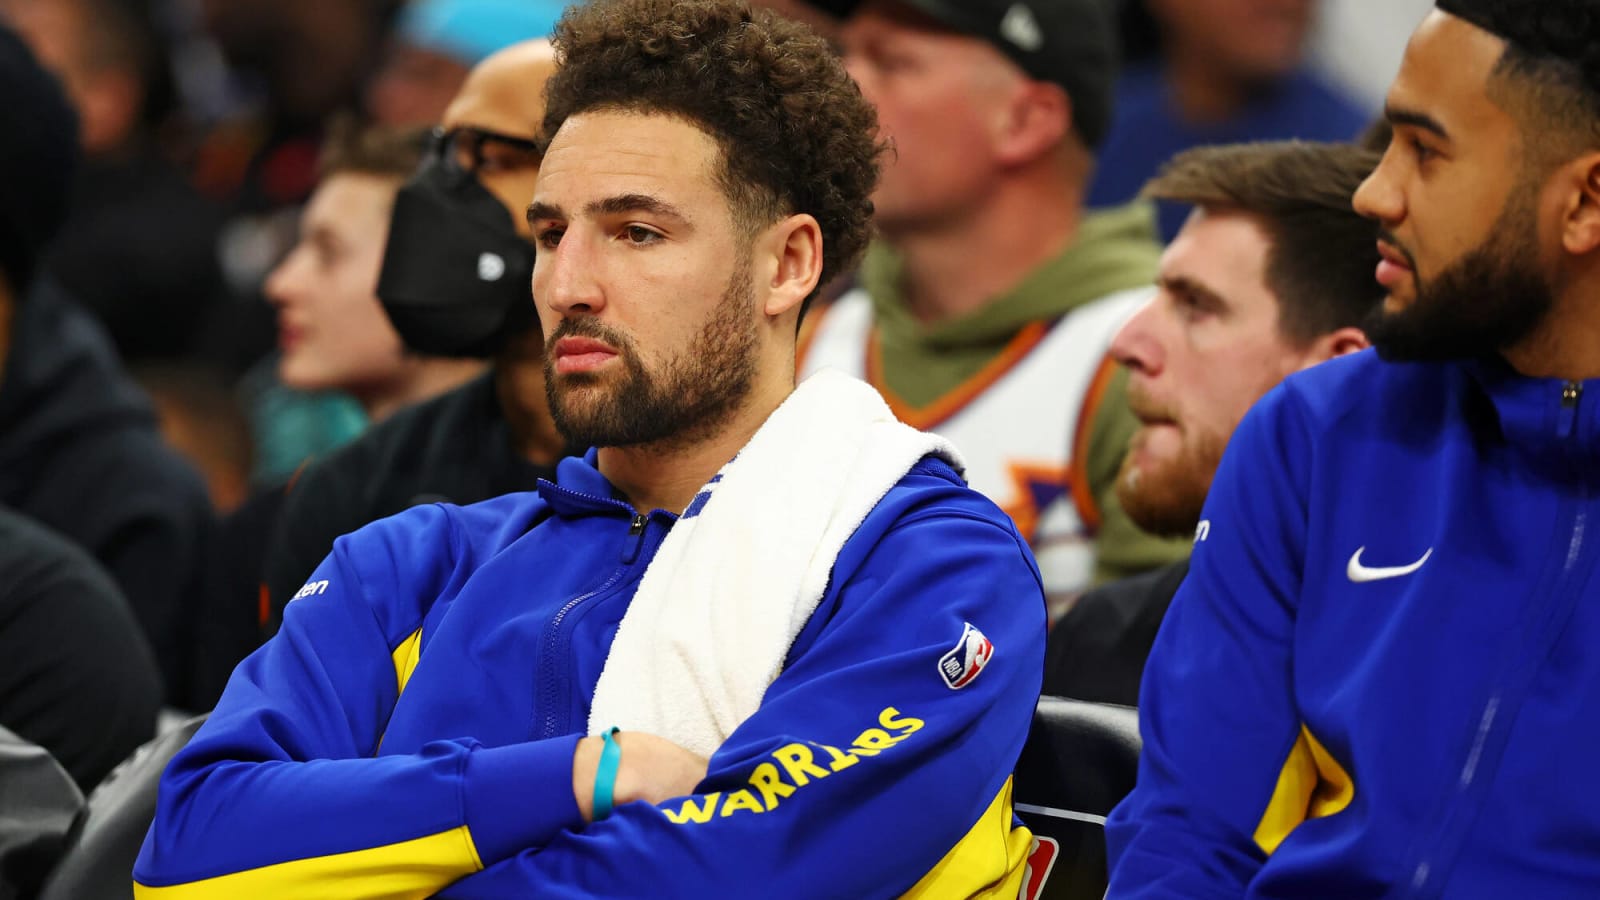 1 Stat Exemplifies The Warriors’ Struggles This Season